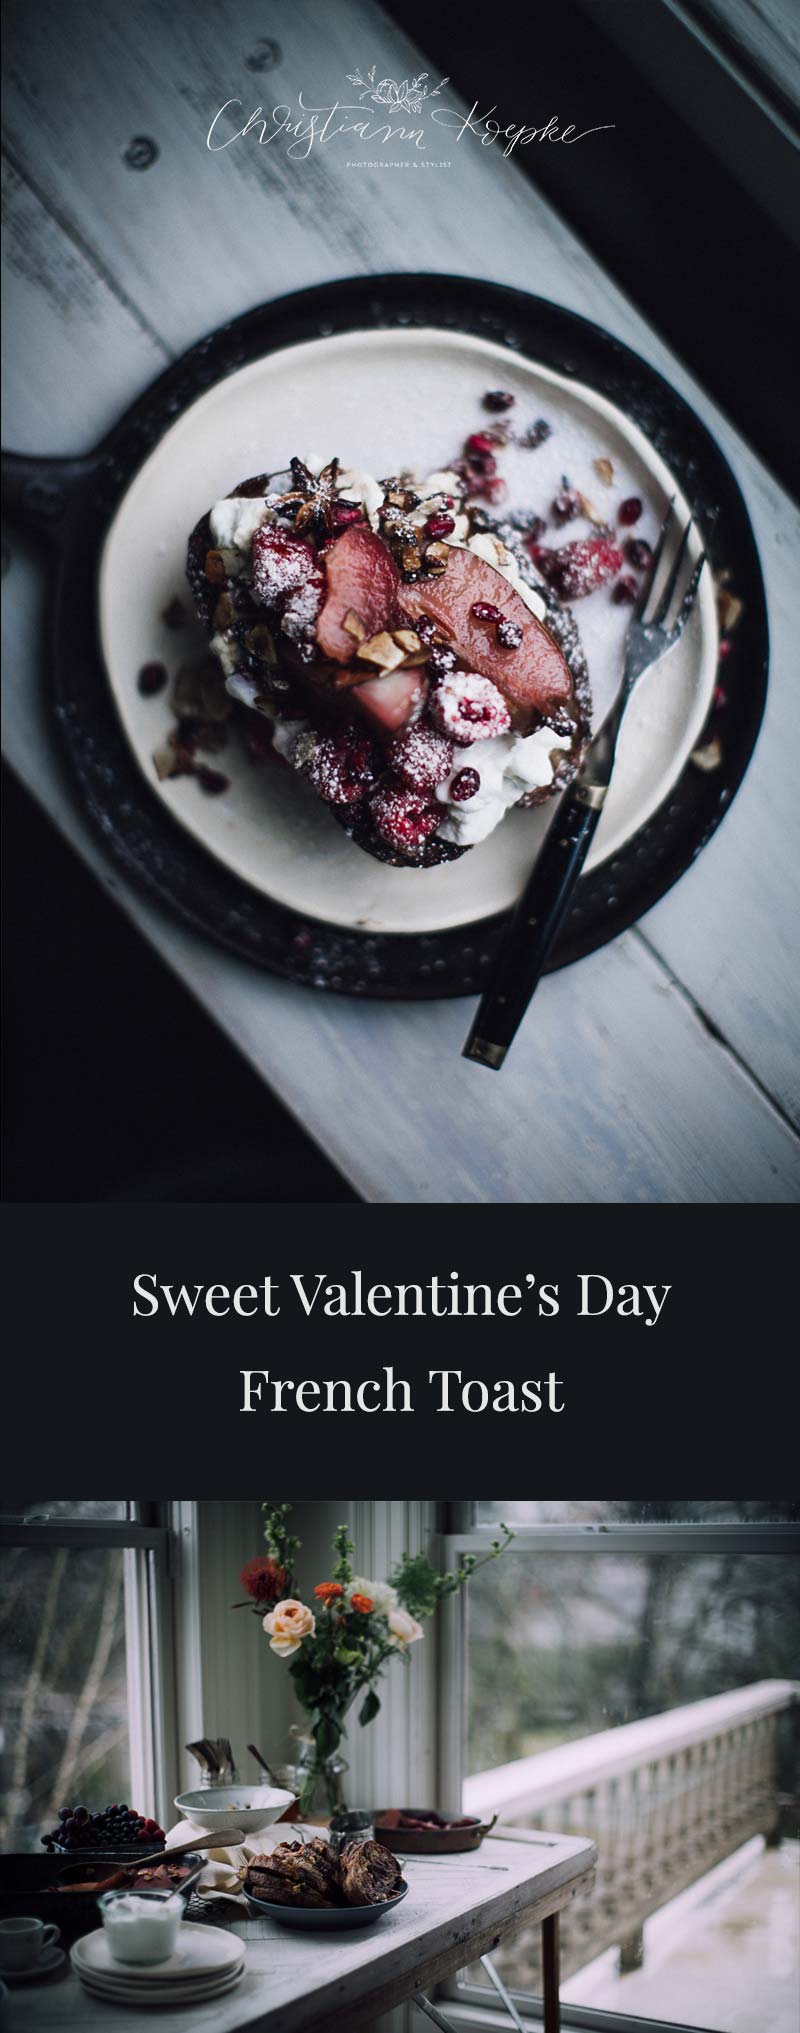 Sweet Valentine's Day French Toast with Poached Pears - ChristiannKoepke.com